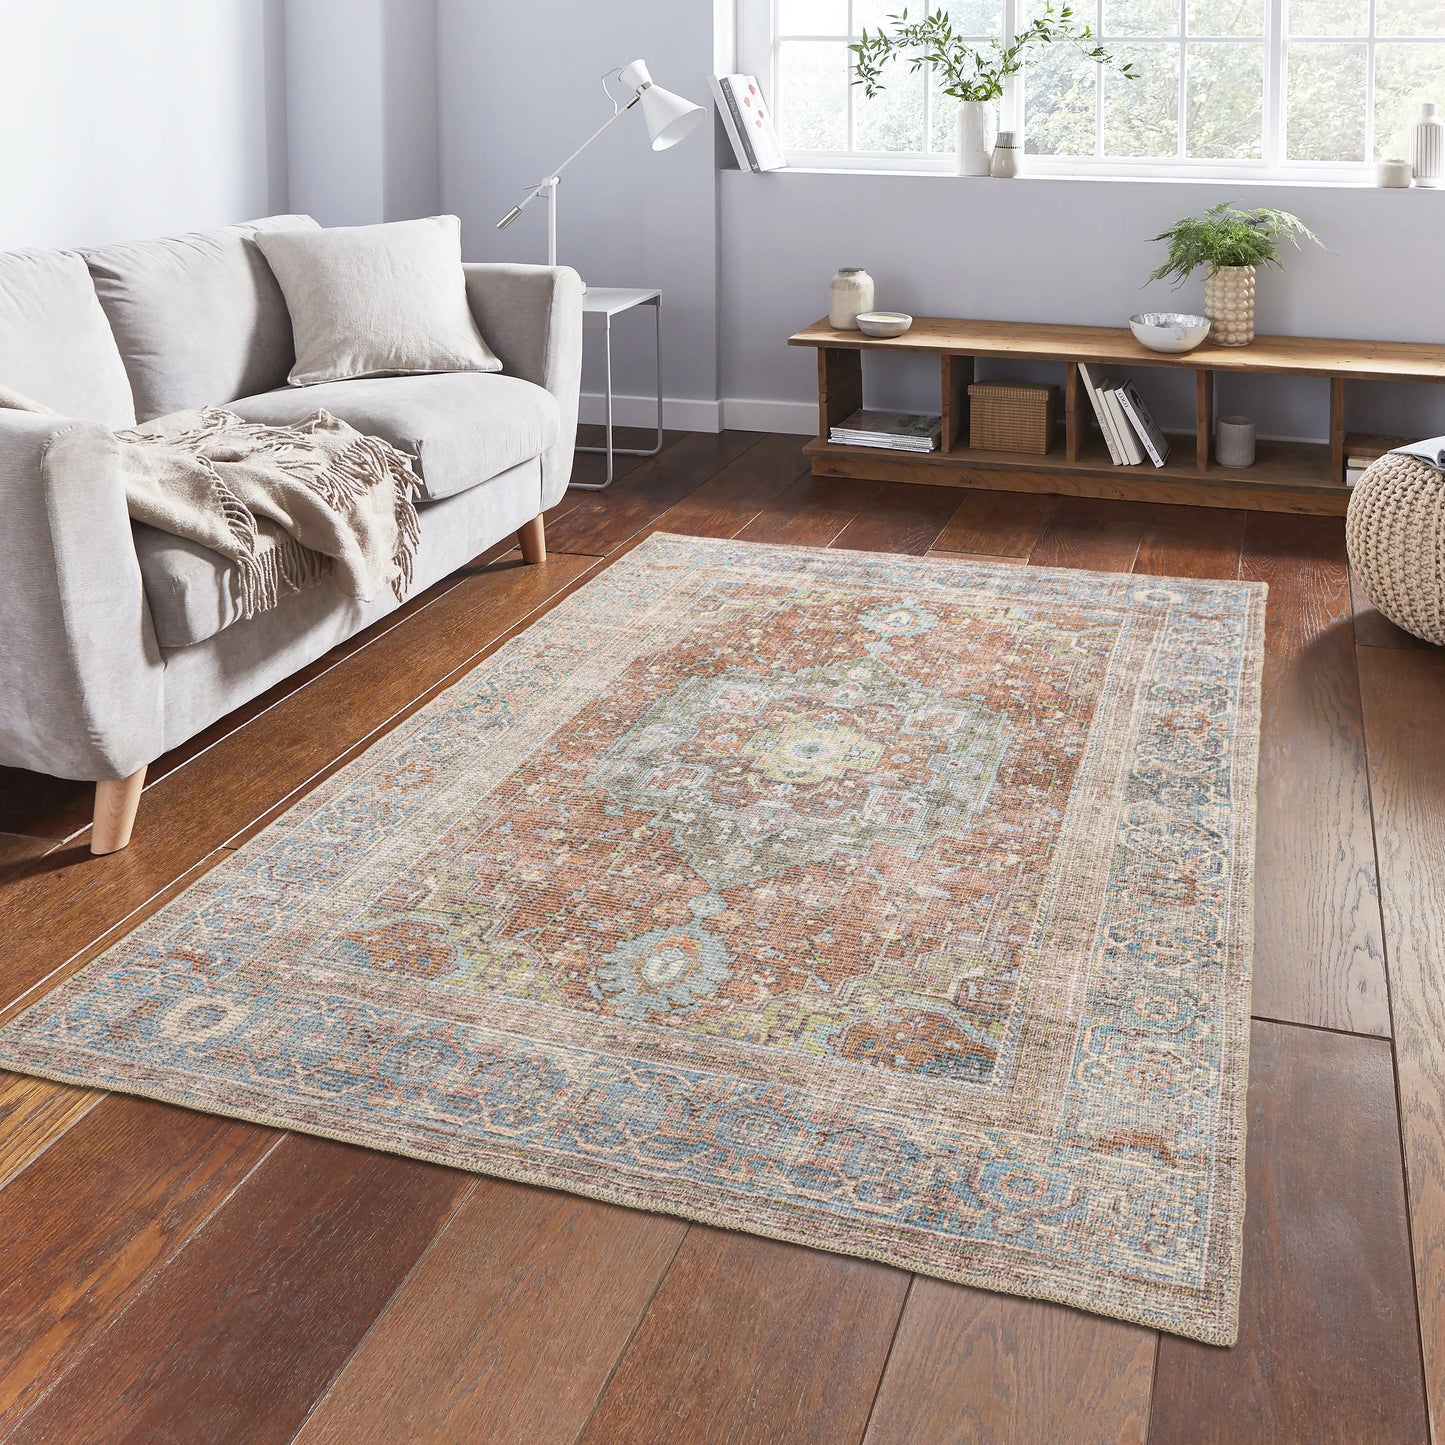 blue brown boho cotton and polyster machine washable traditional rustic area rug 6x8, 6x9 ft Living Room, Bedroom, Dining Area, Kitchen Carpet